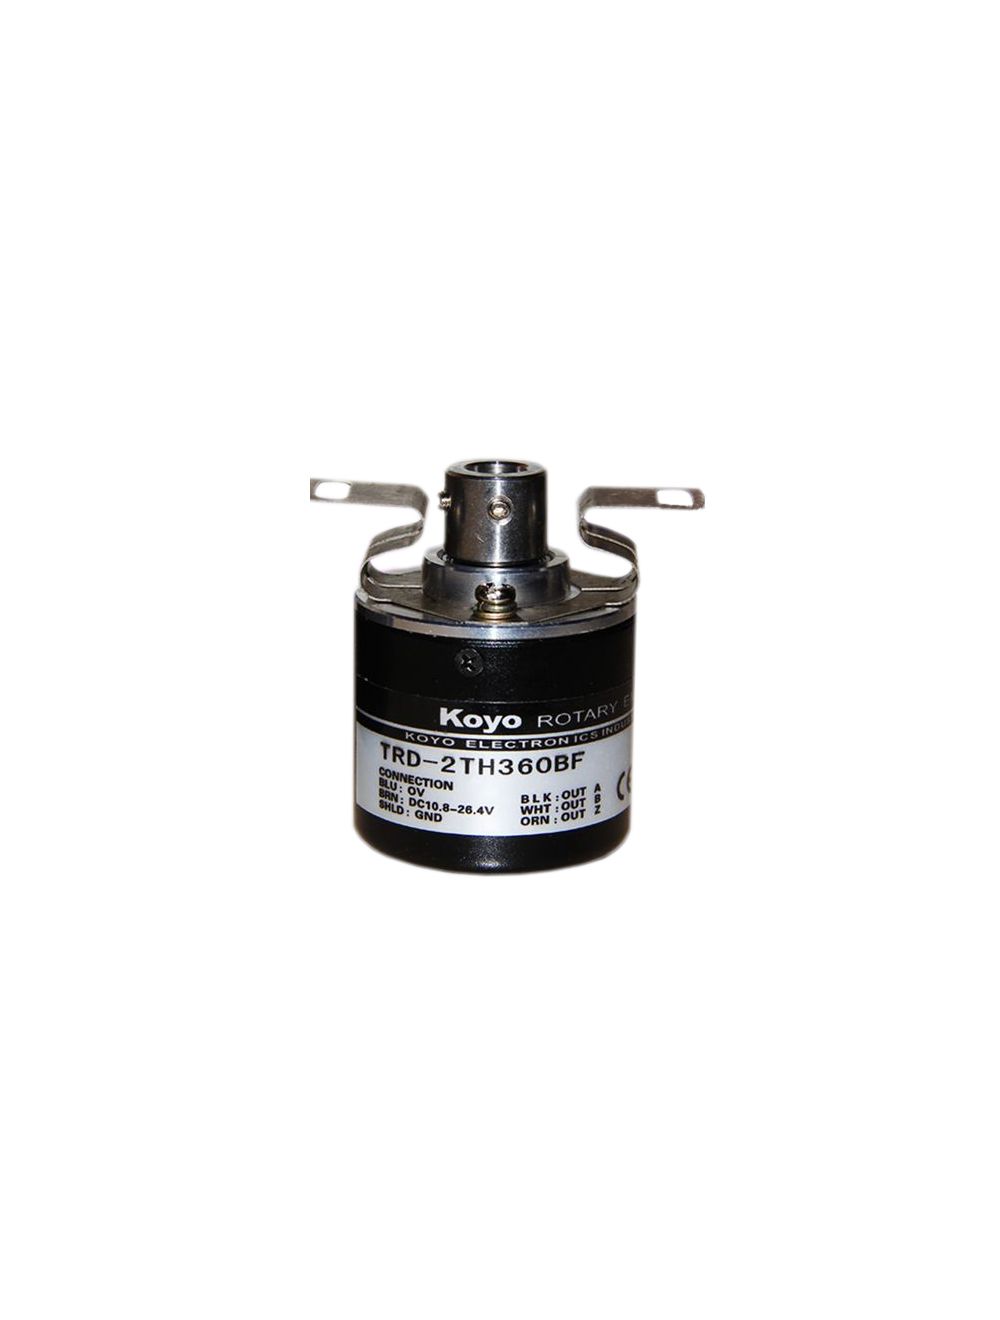 New In stock for sale, KOYO Hollow-shaft Incremental Rotary Encoder TRD-2TH360BF-2M